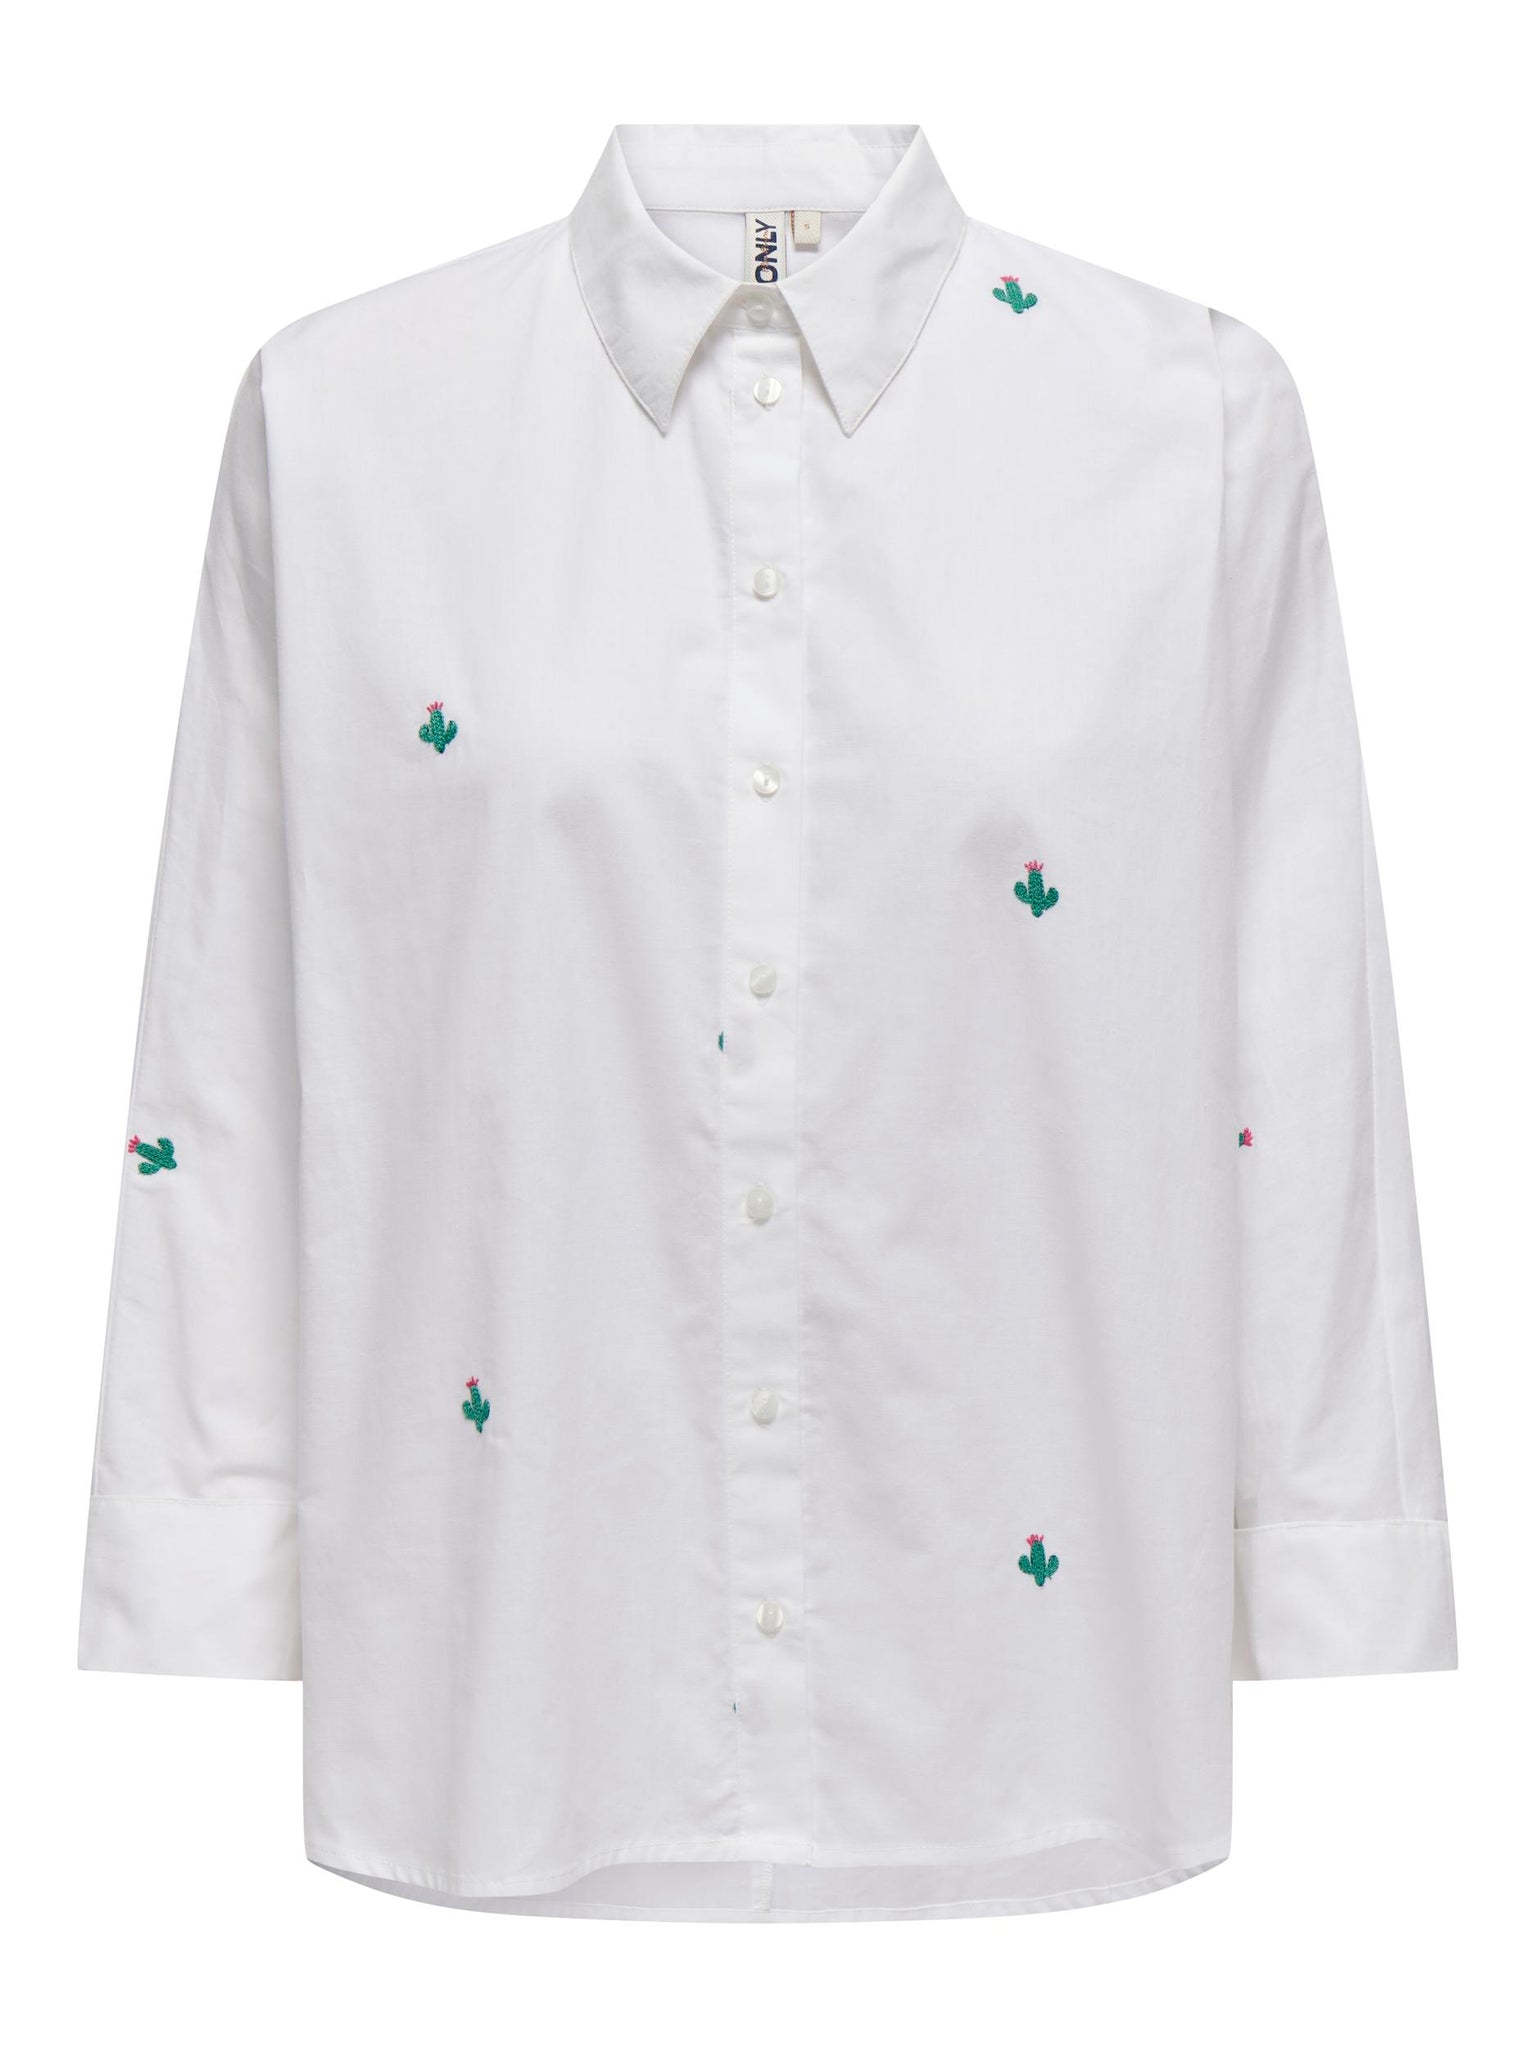 Only Embroidered Oversized White Shirt